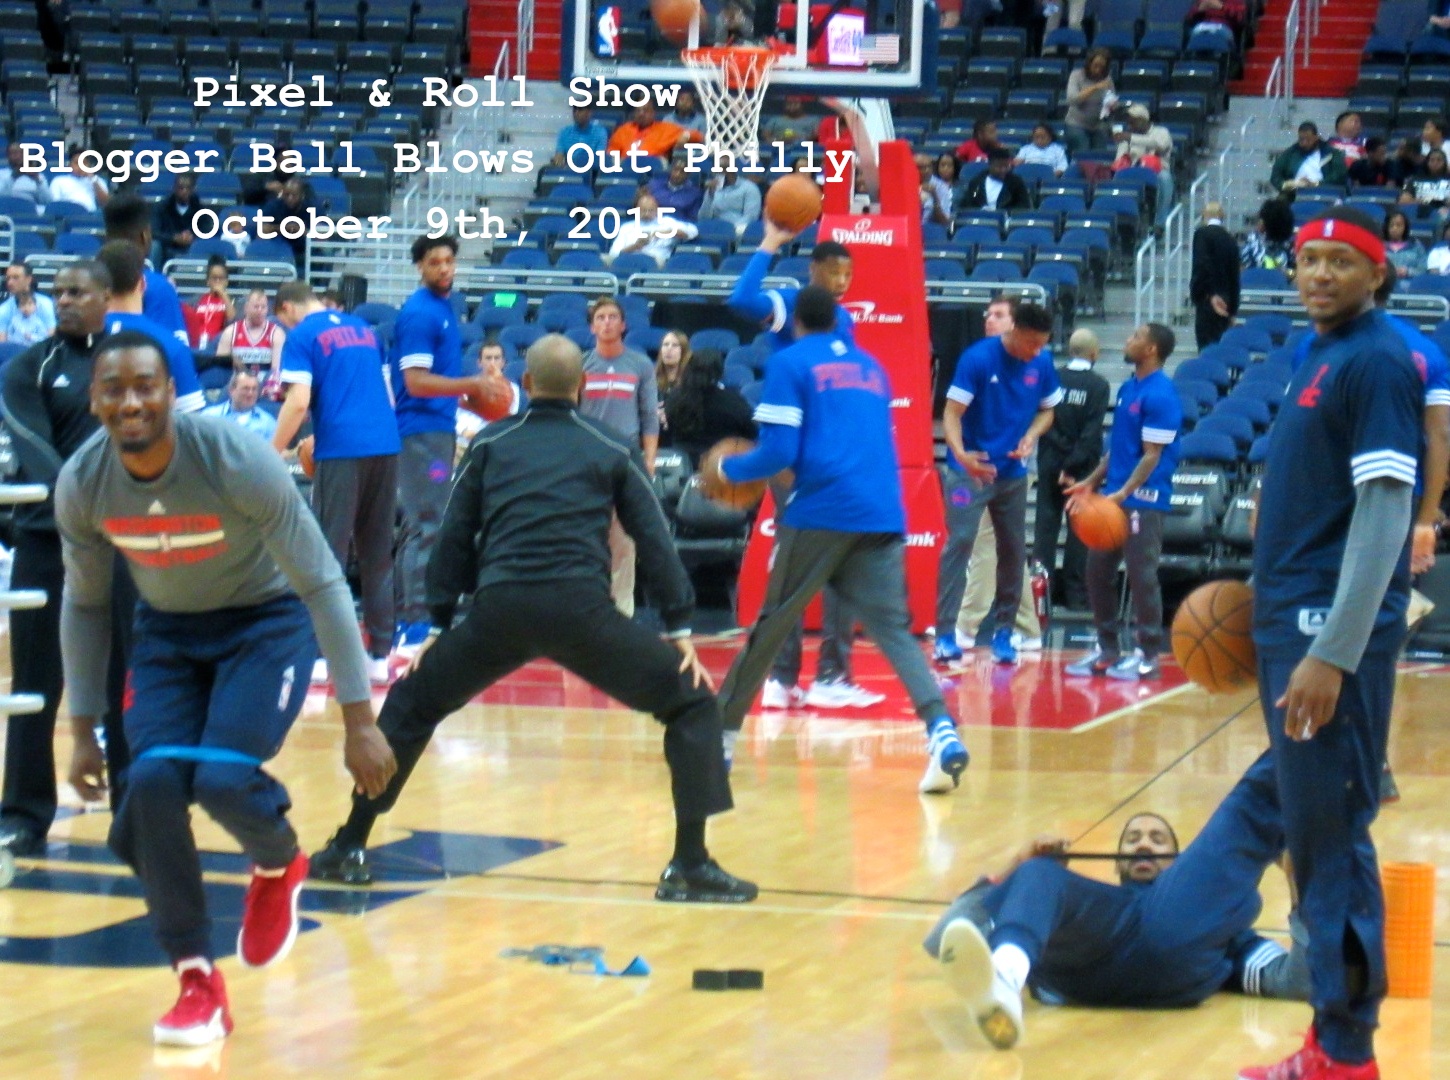 Wizards Destroy 76ers in Preseason Opener - Successful Debut of "Blogger Ball" 10/9/2015